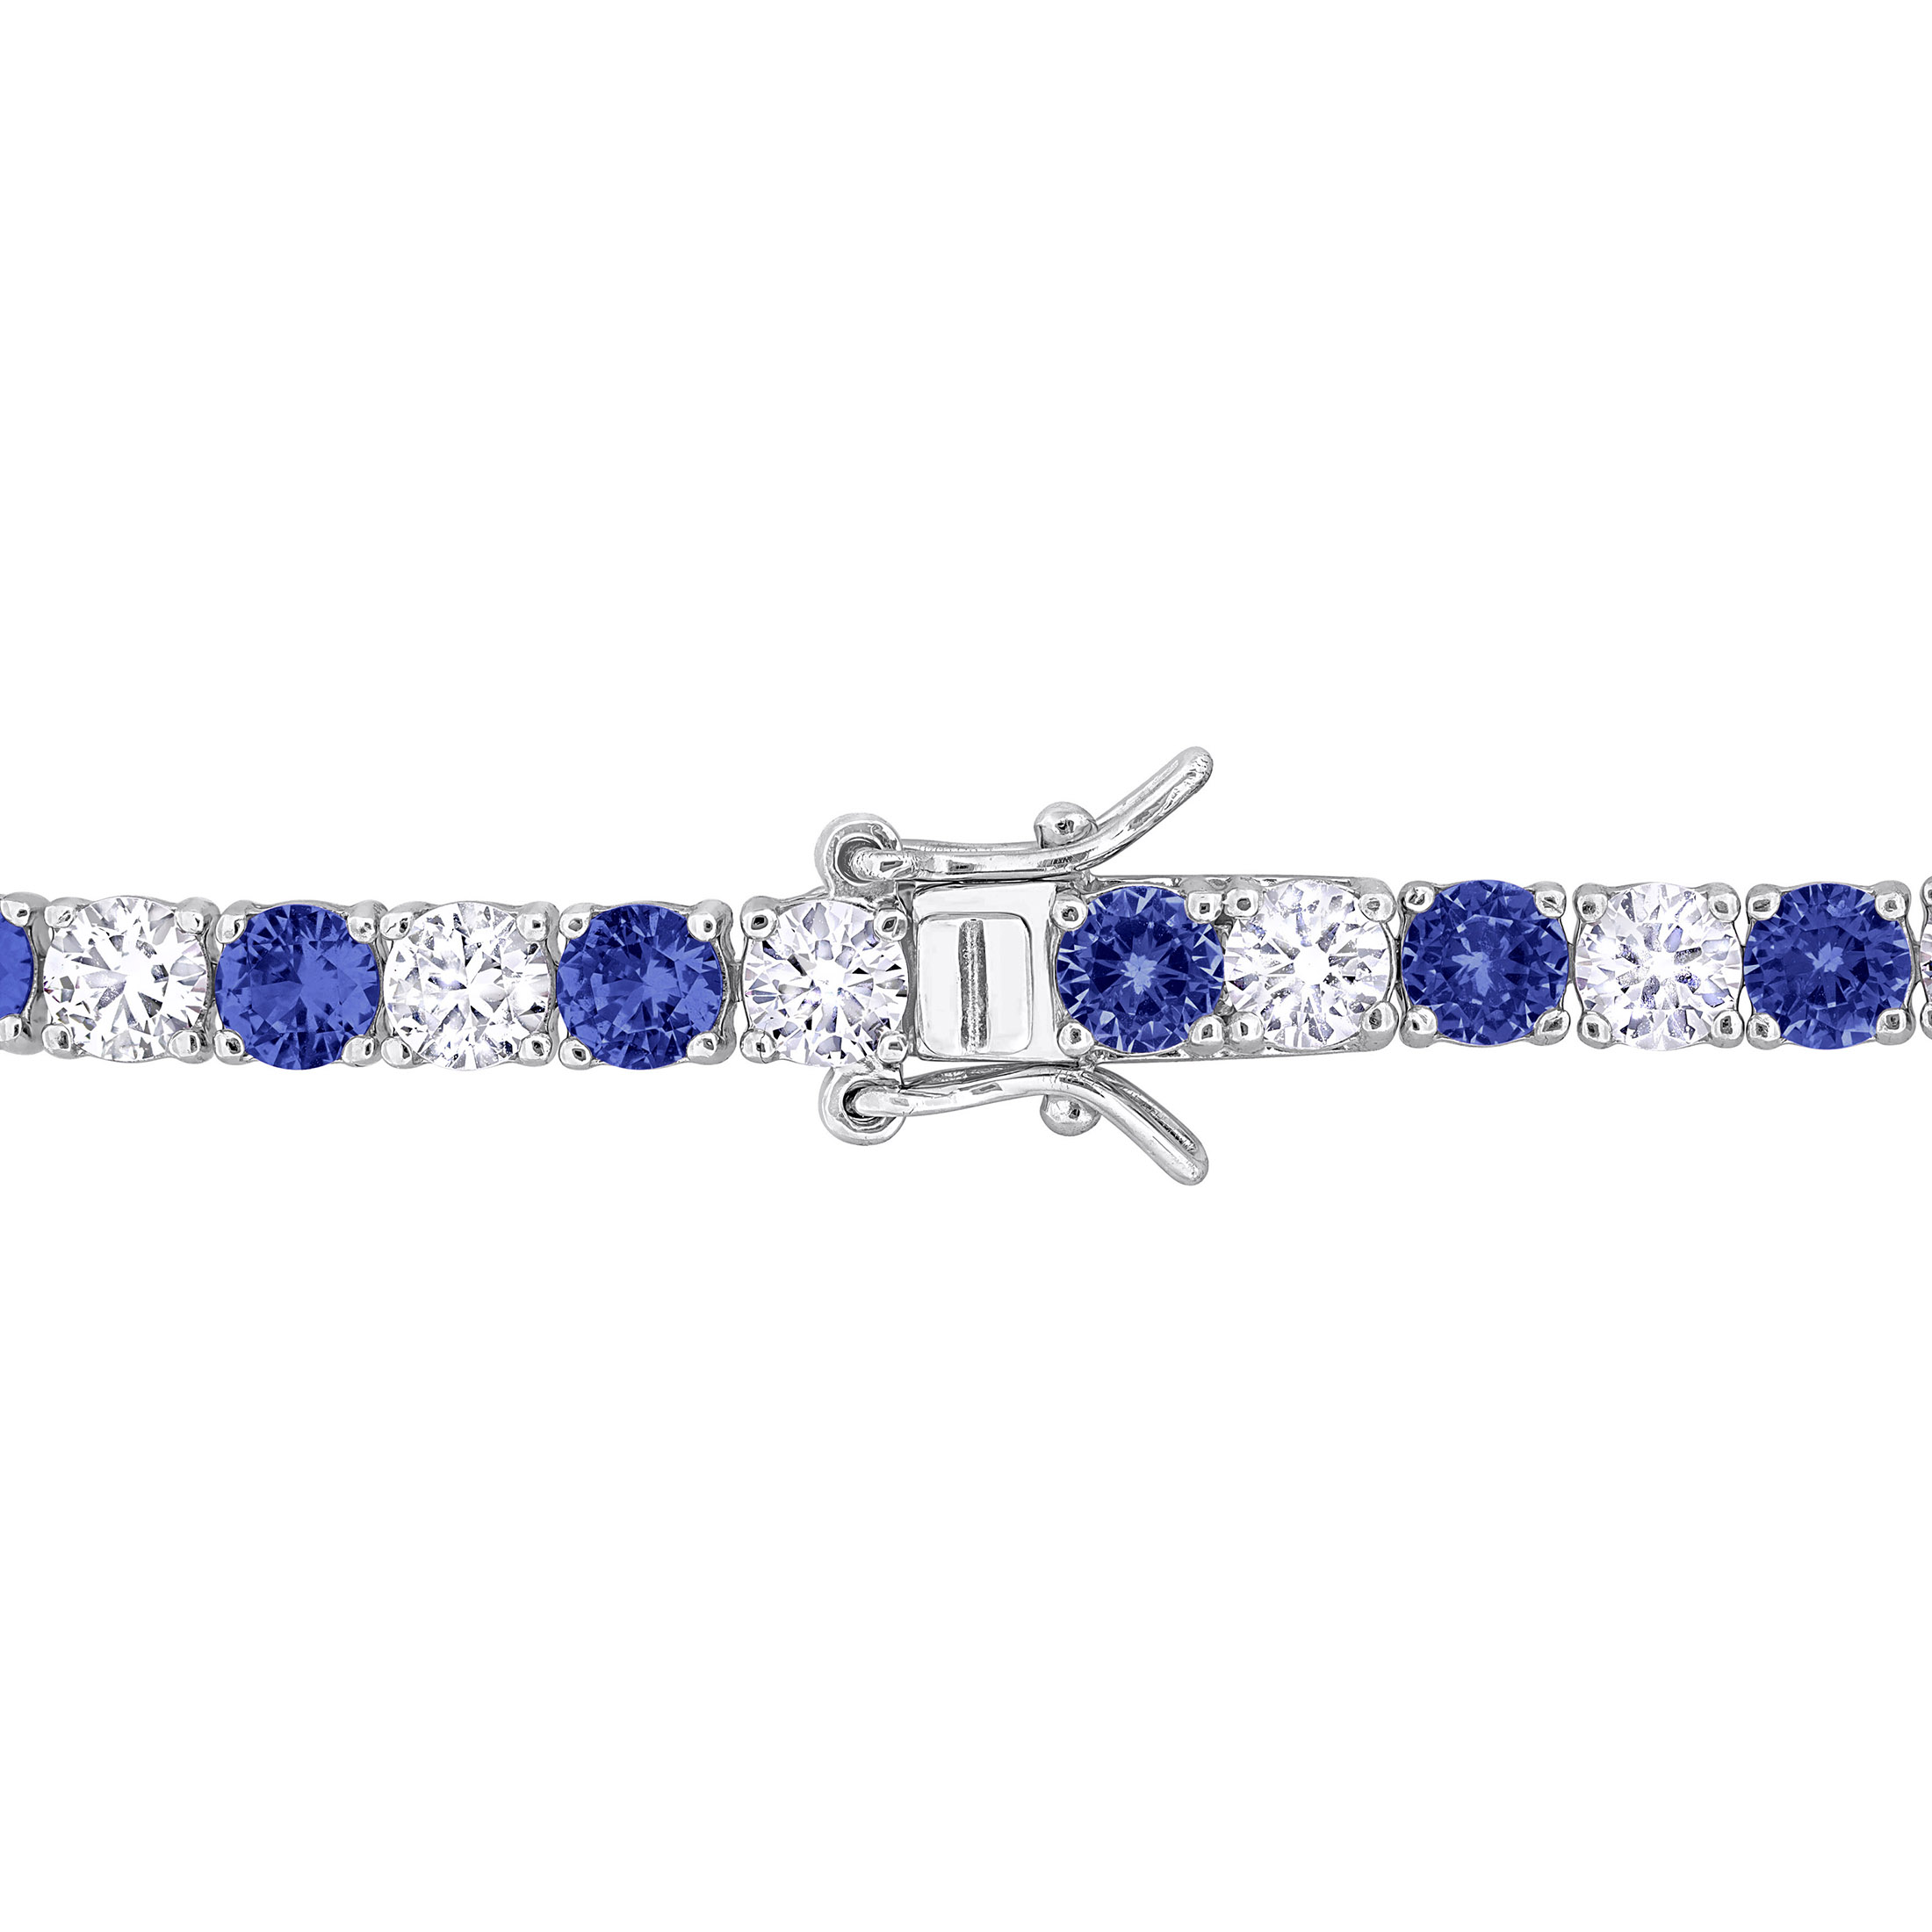 Everly Women's 14-1/4 Carat T.G.W. Created Blue & White Sapphire Sterling Silver Tennis Bracelet - image 5 of 9